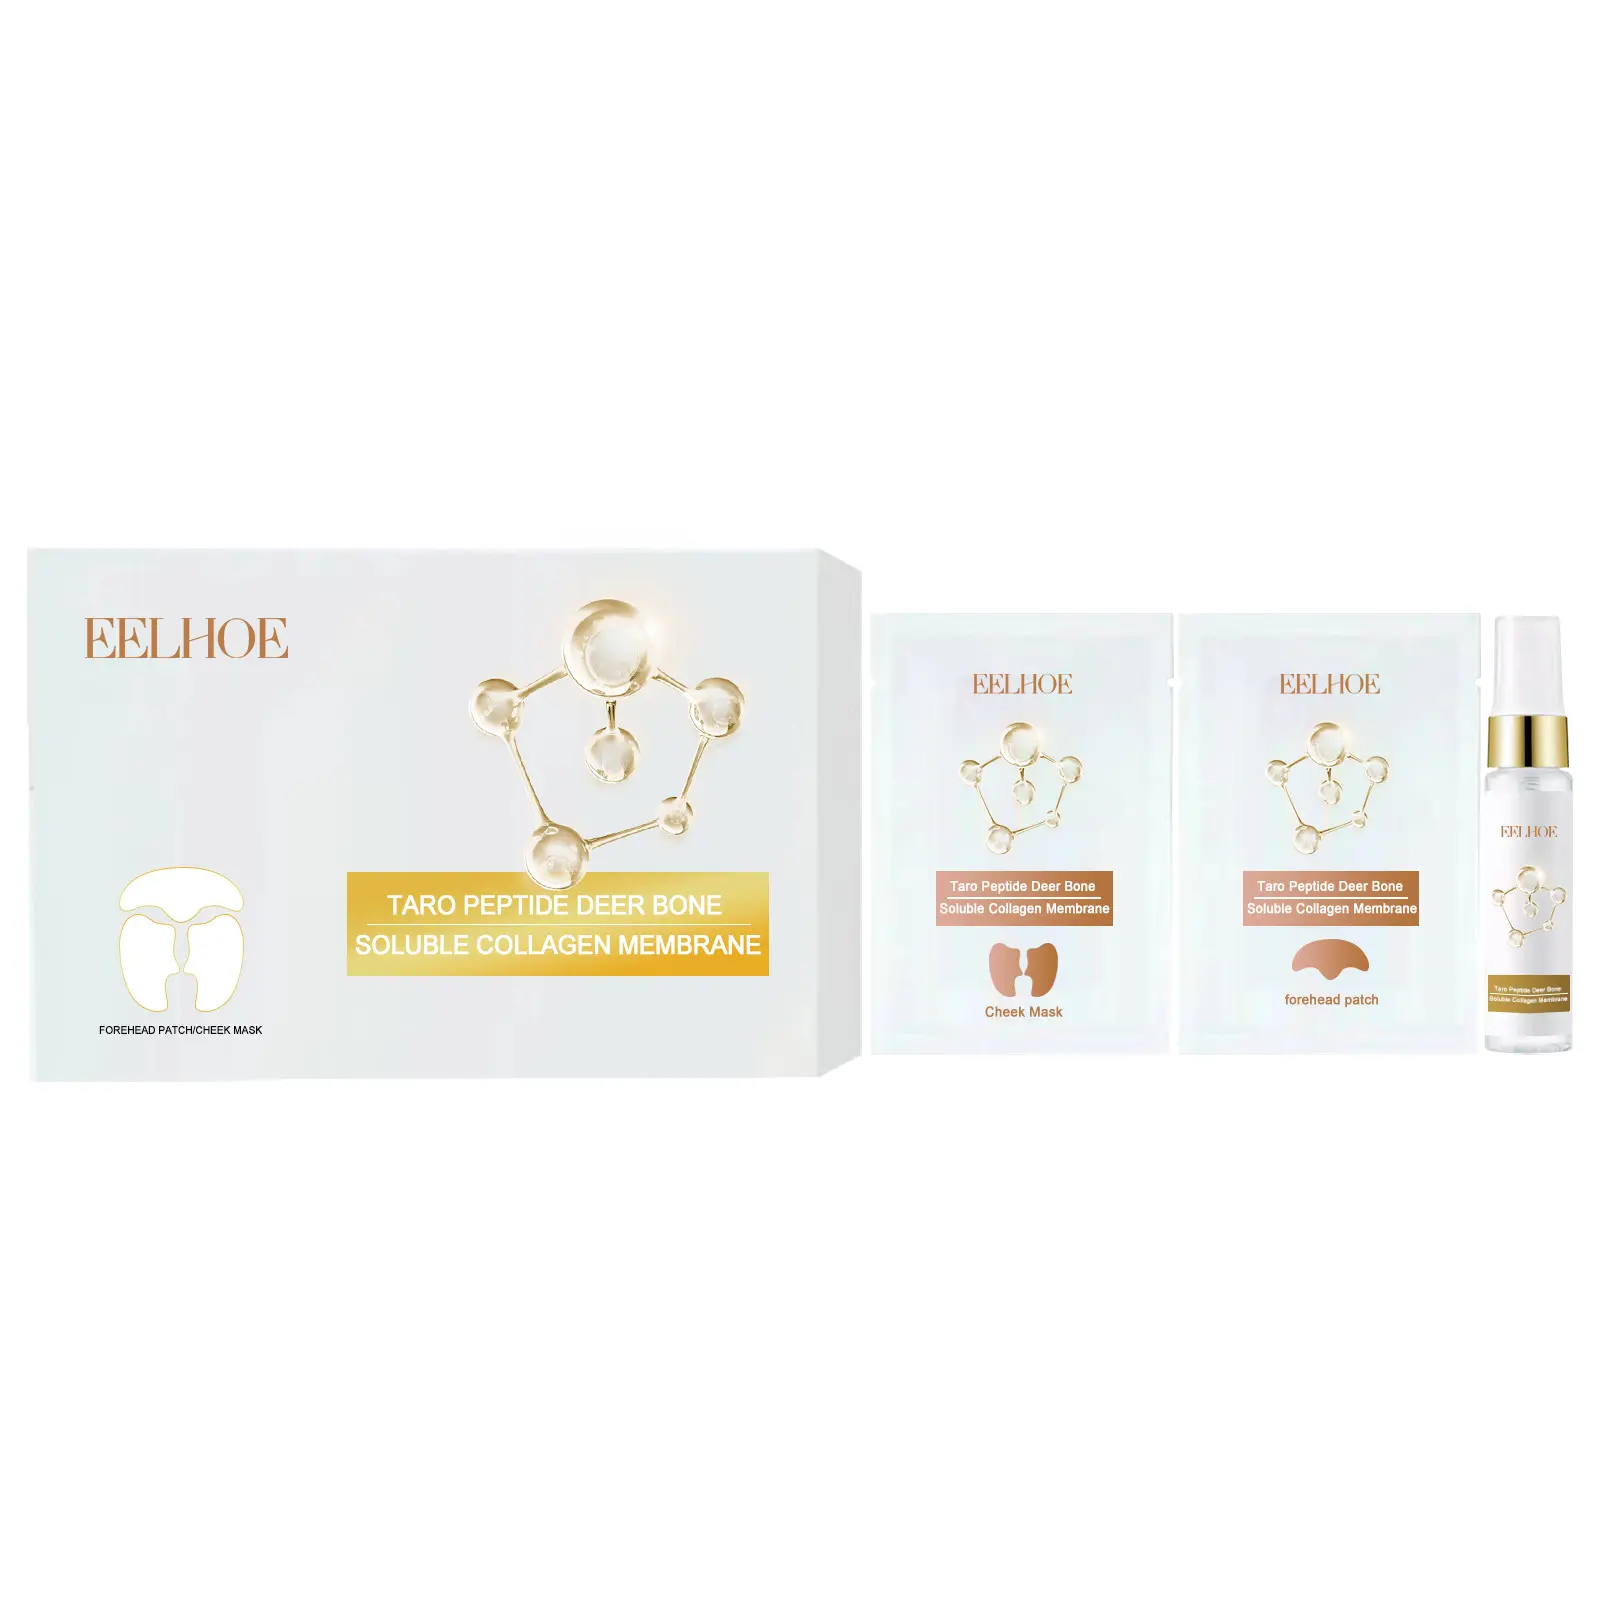 Private Label EELHOE Moisturizing Nourishing Protein Membrane Anti-wrinkle Forehead and Check Mask